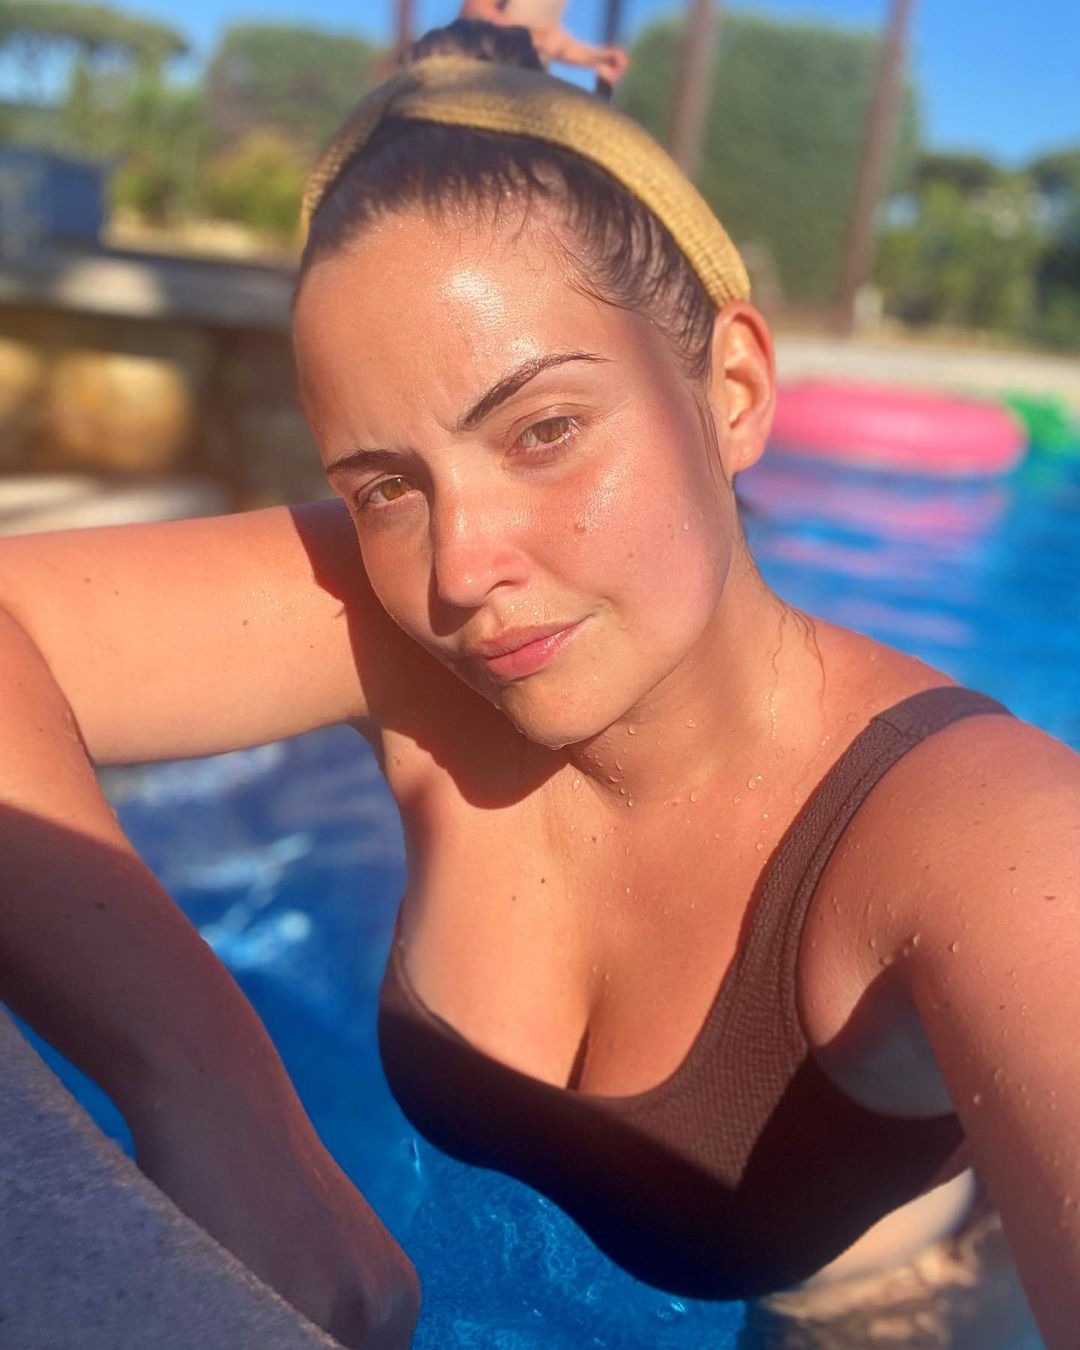 Jacqueline was on holiday with her kids and husband Dan